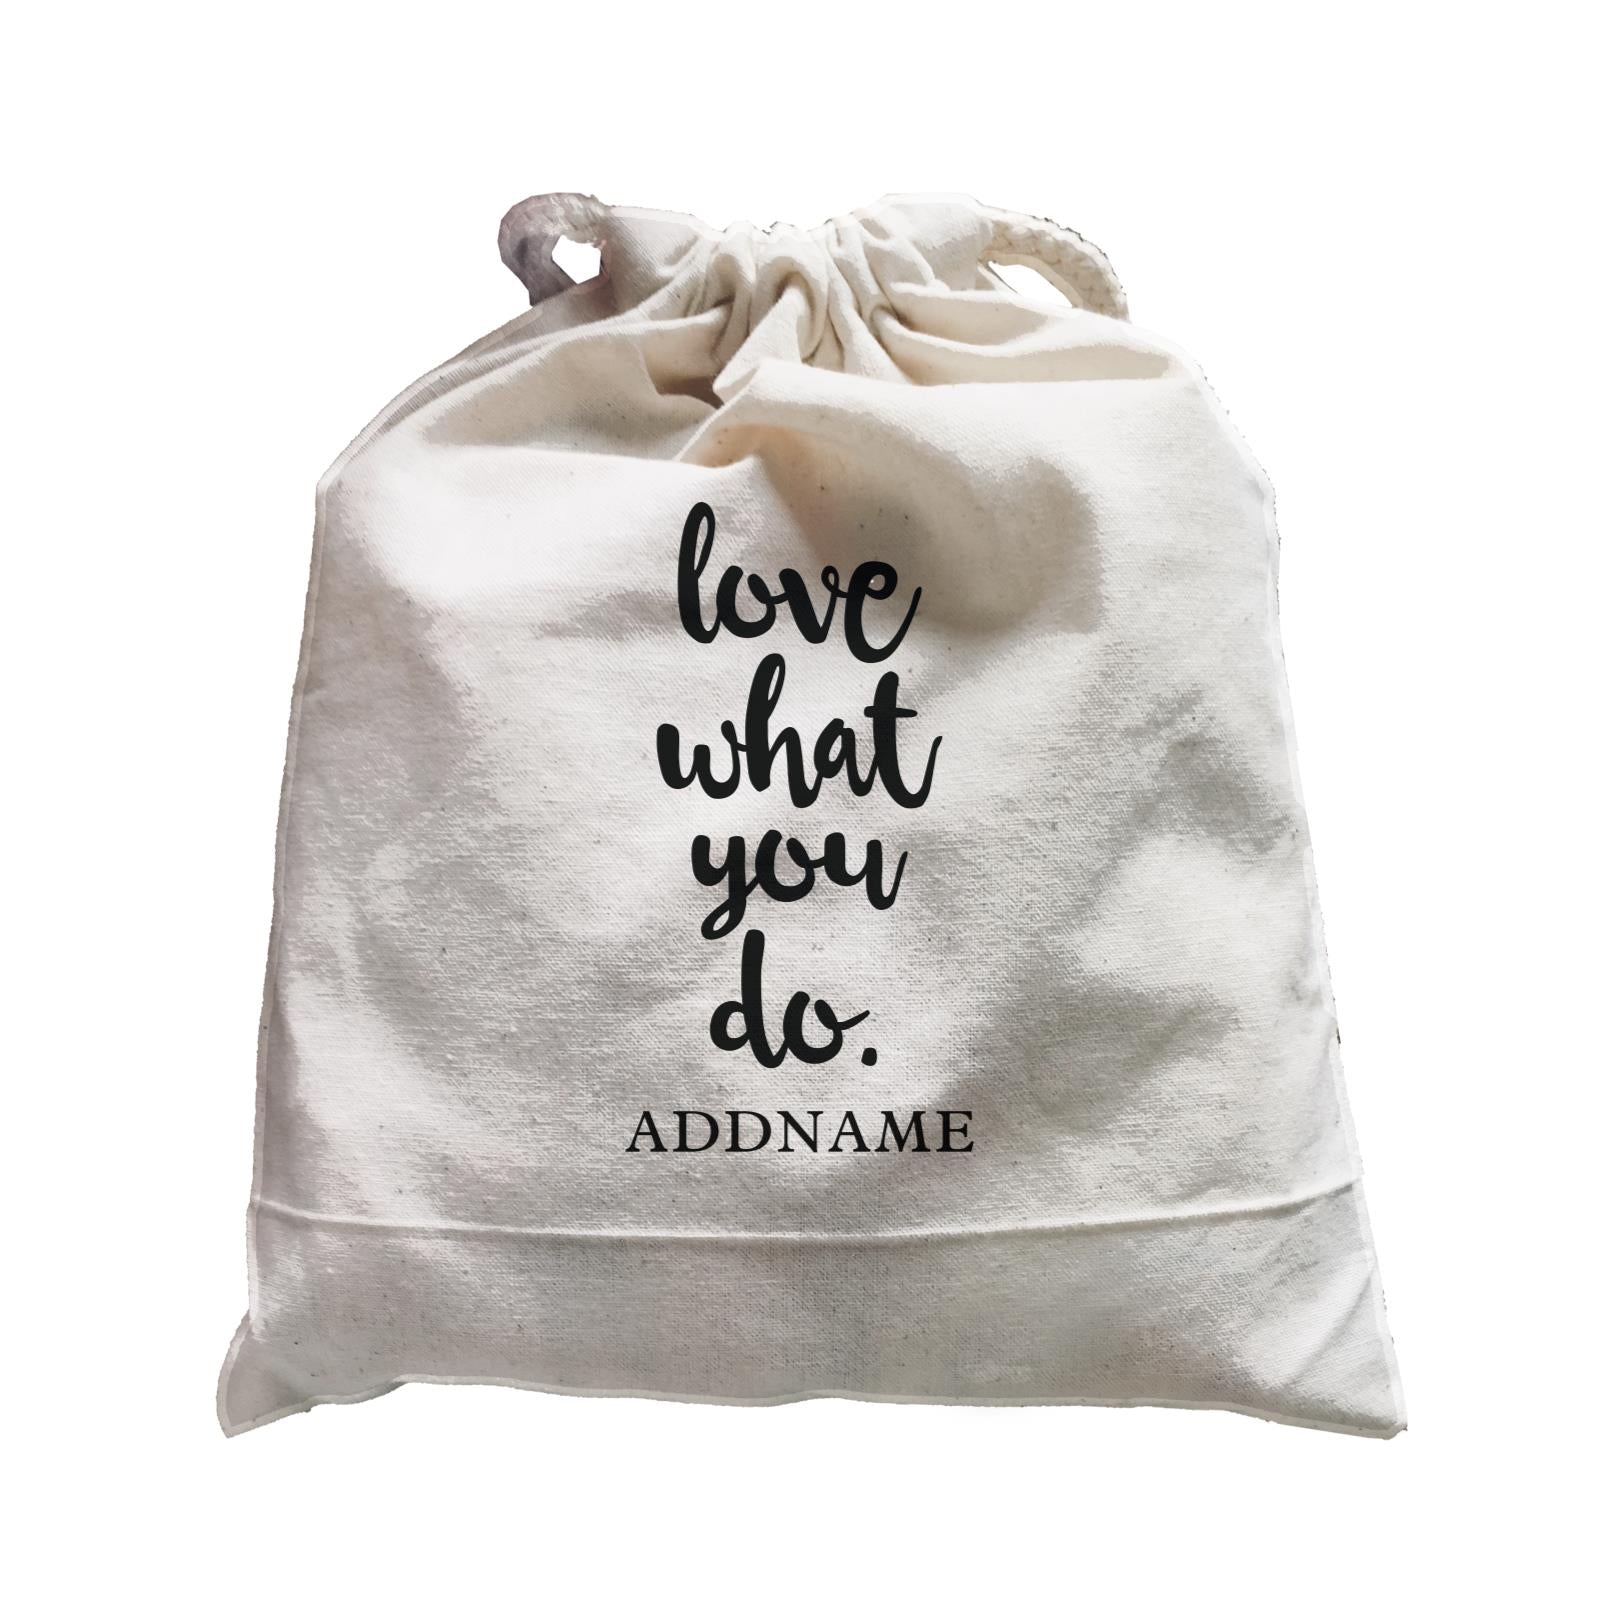 Inspiration Quotes Love What You Do Addname Satchel